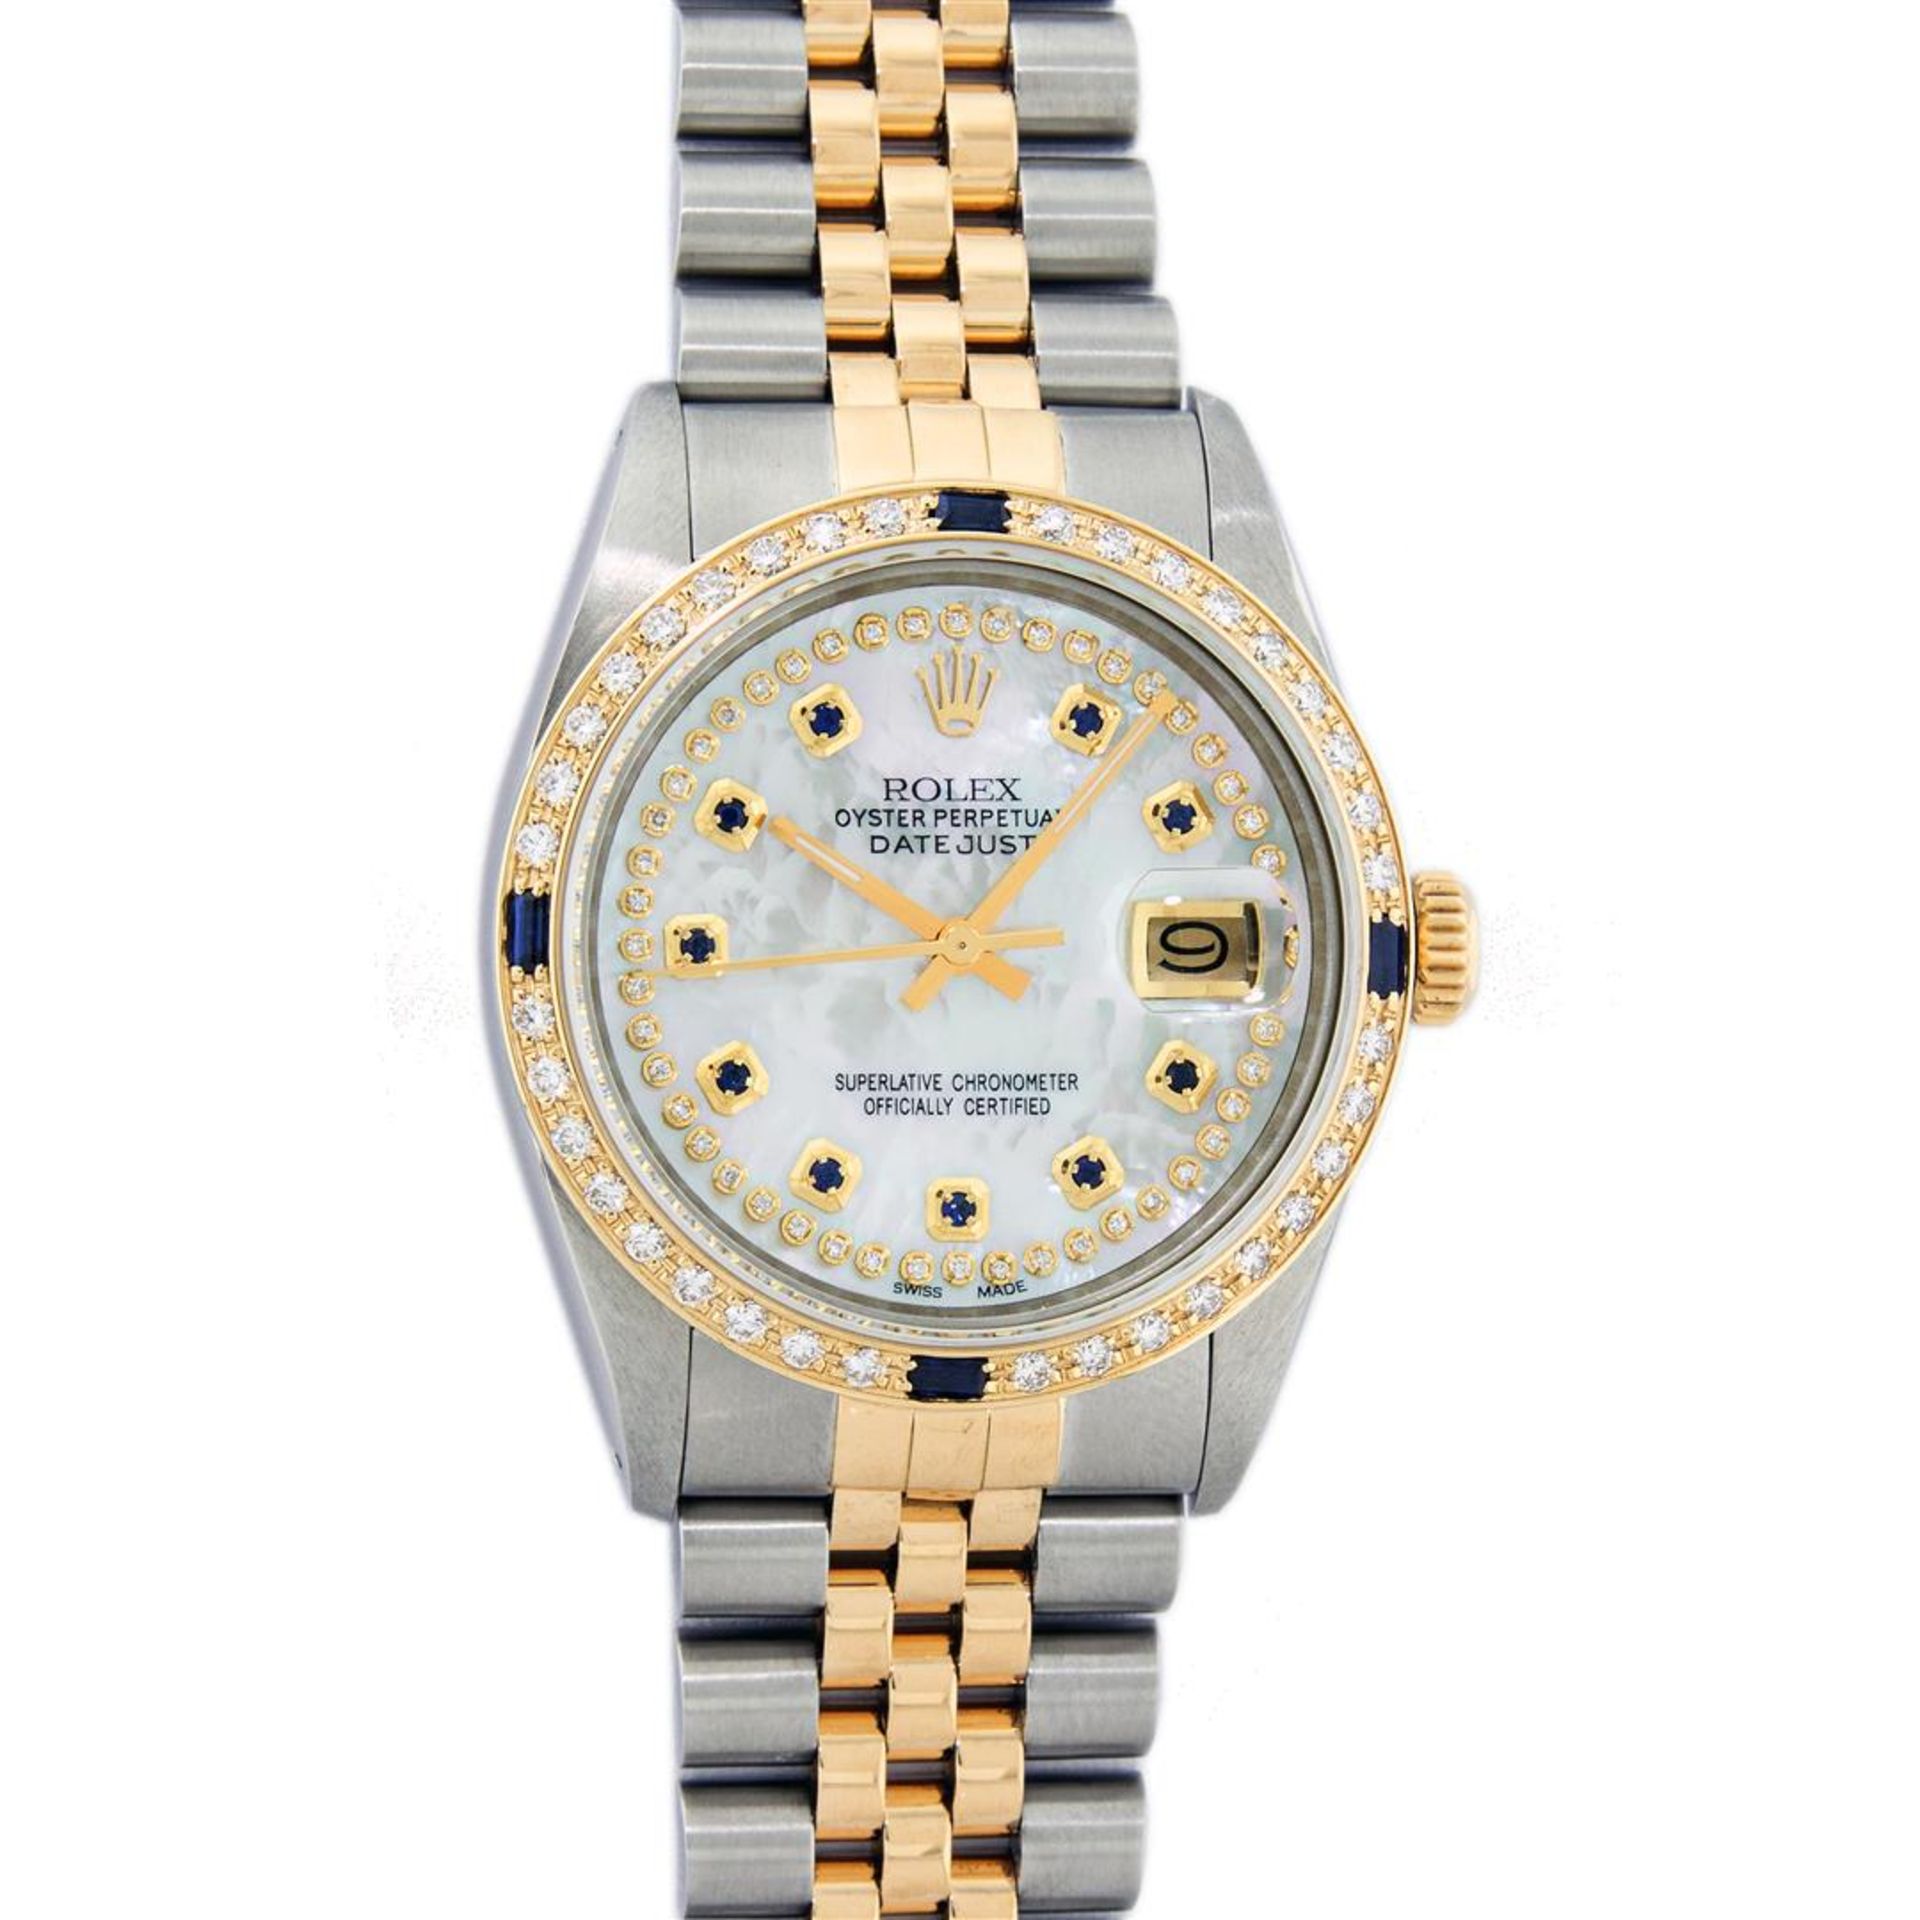 Rolex Mens 2 Tone Mother Of Pearl Diamond & Sapphire Datejust Wristwatch - Image 2 of 9